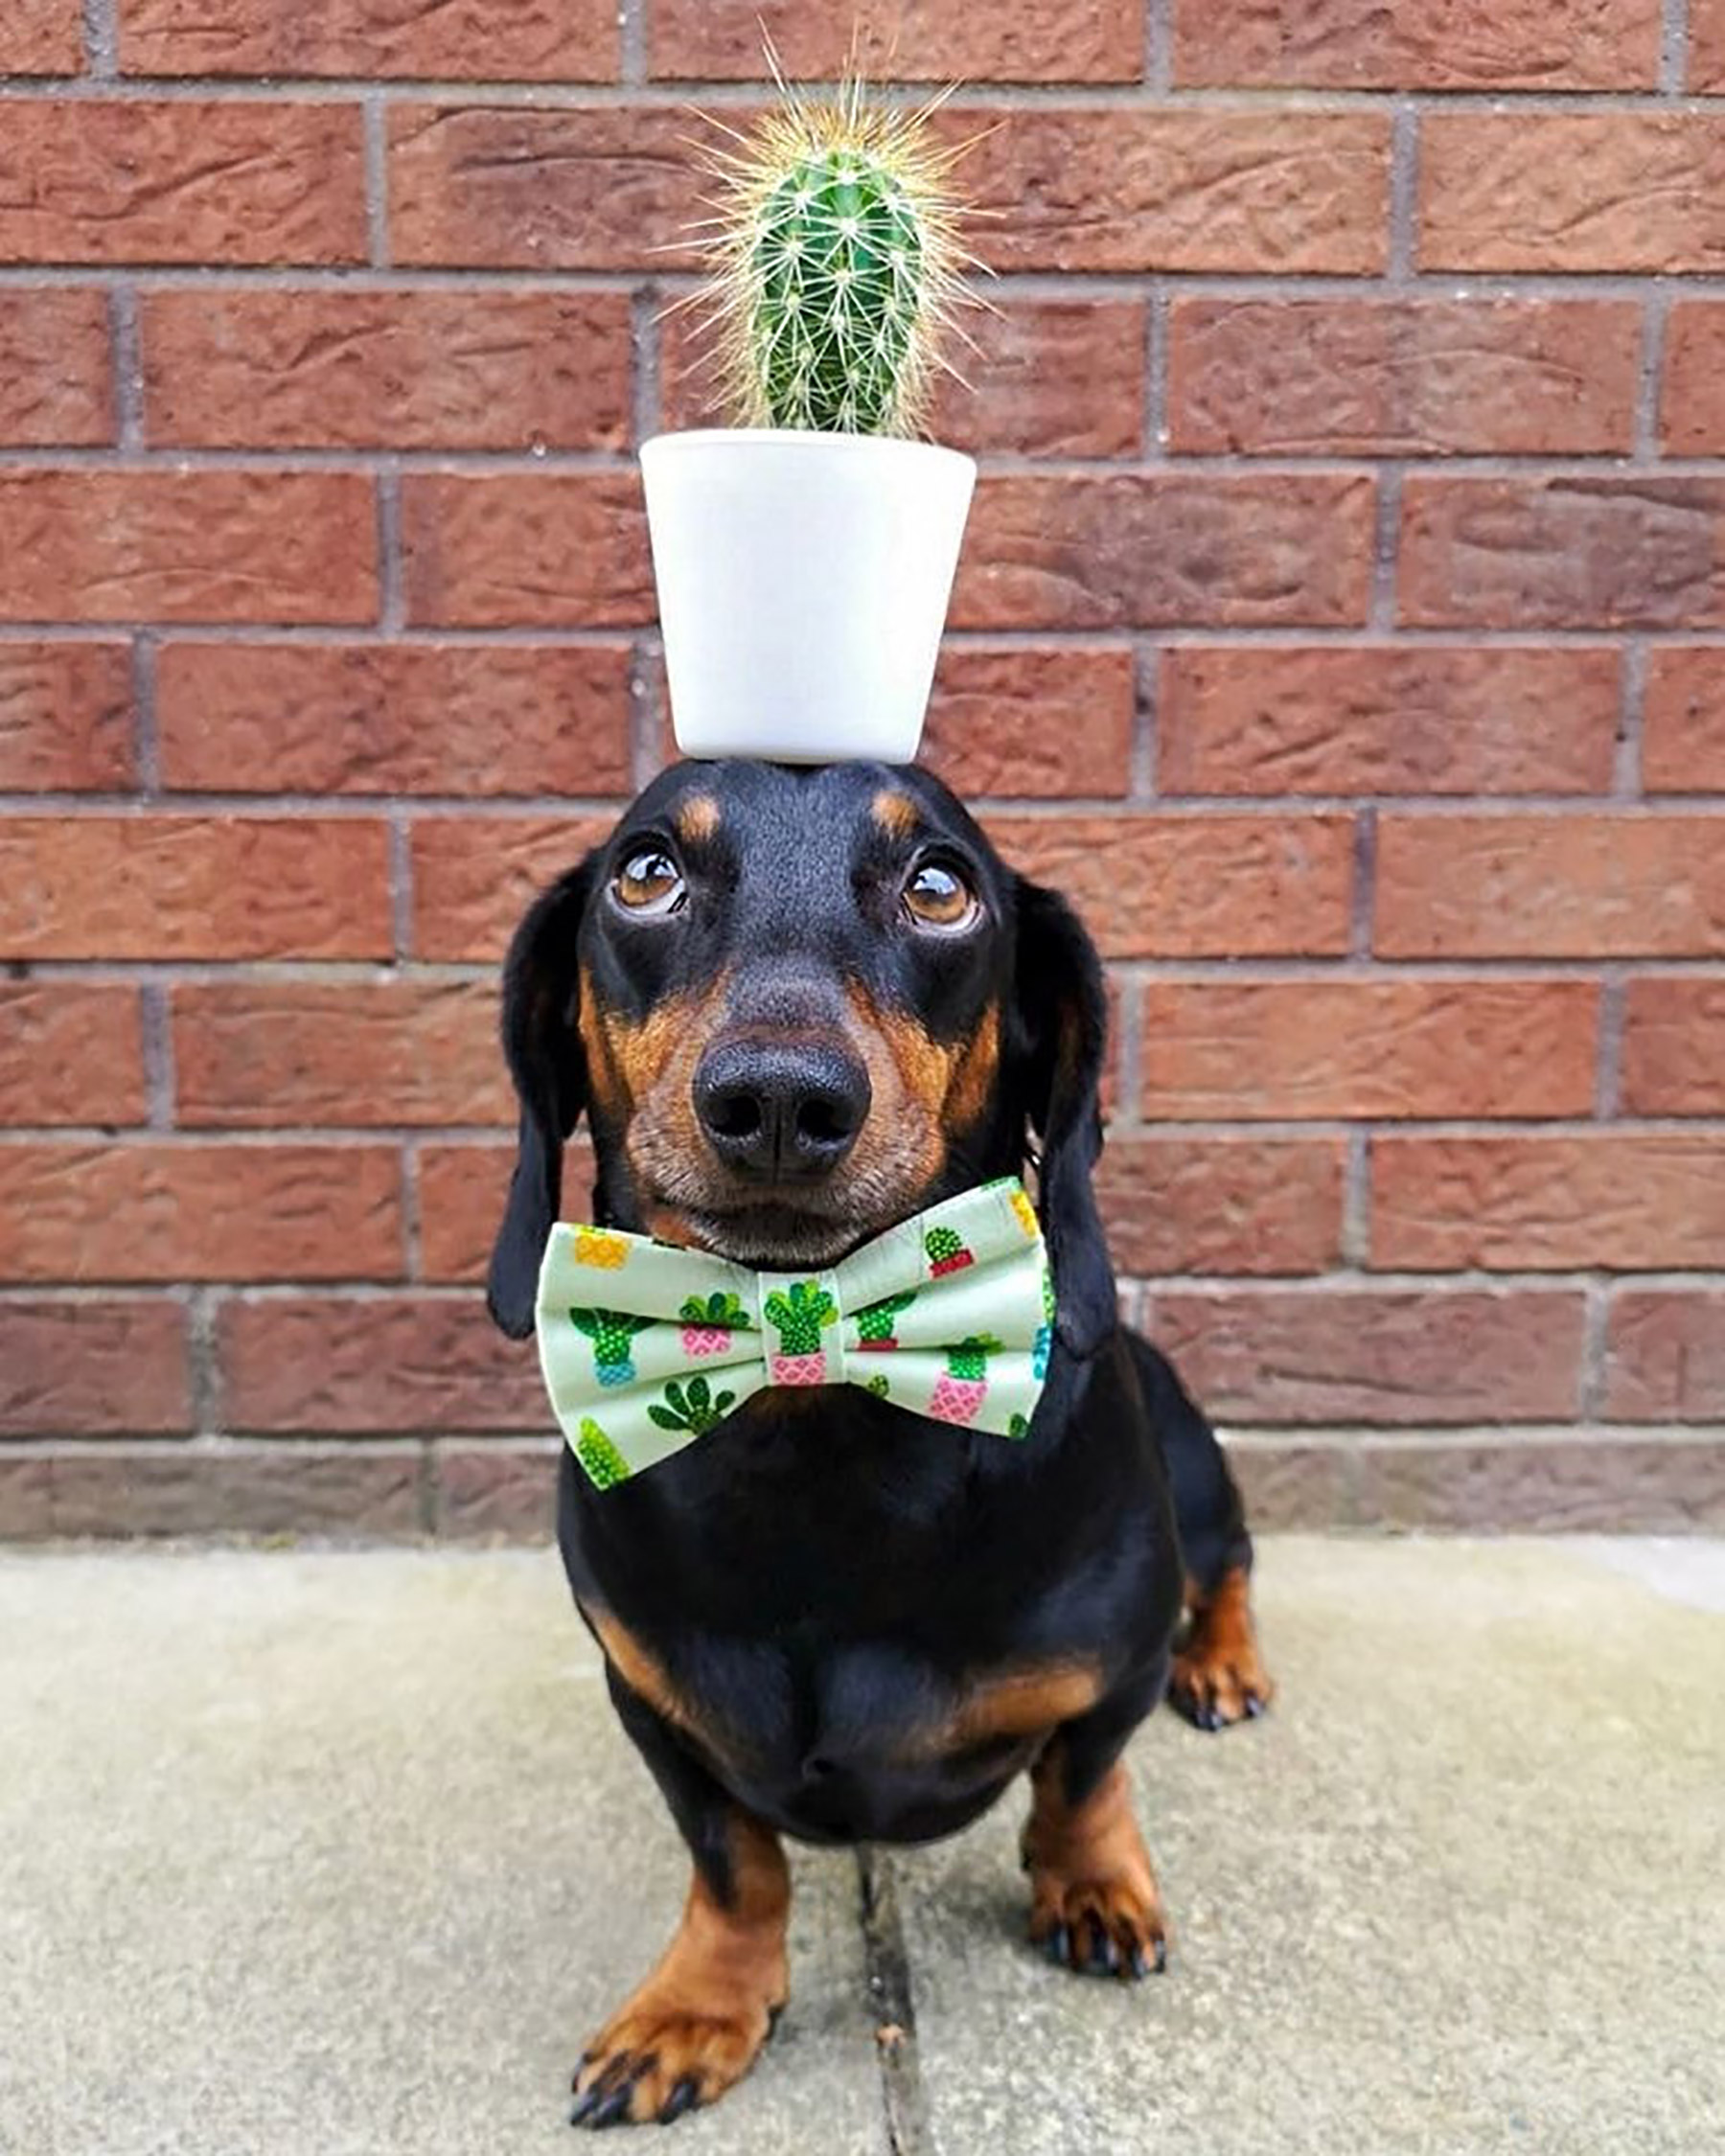 Lovable Dachshund Harlso Able To Perfectly Balance Objects On His Head